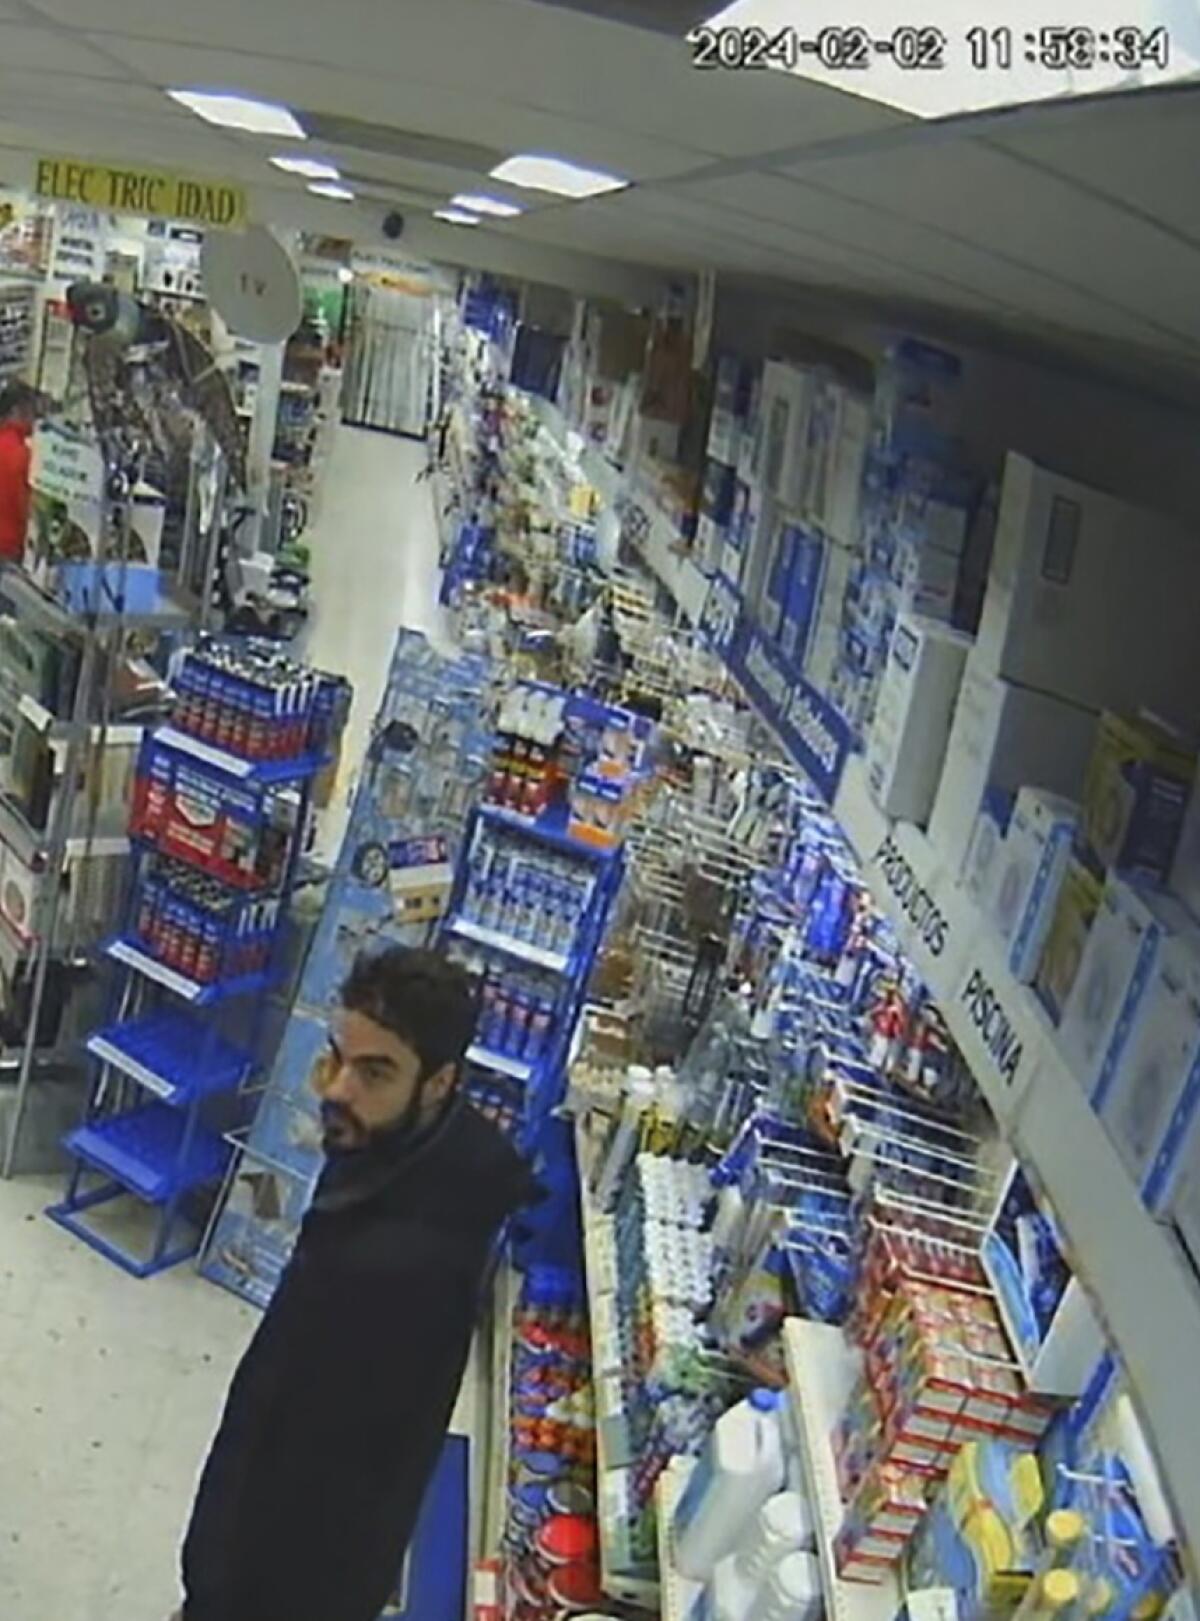 Image allegedly shows David Knezevich in a hardware store in Madrid.